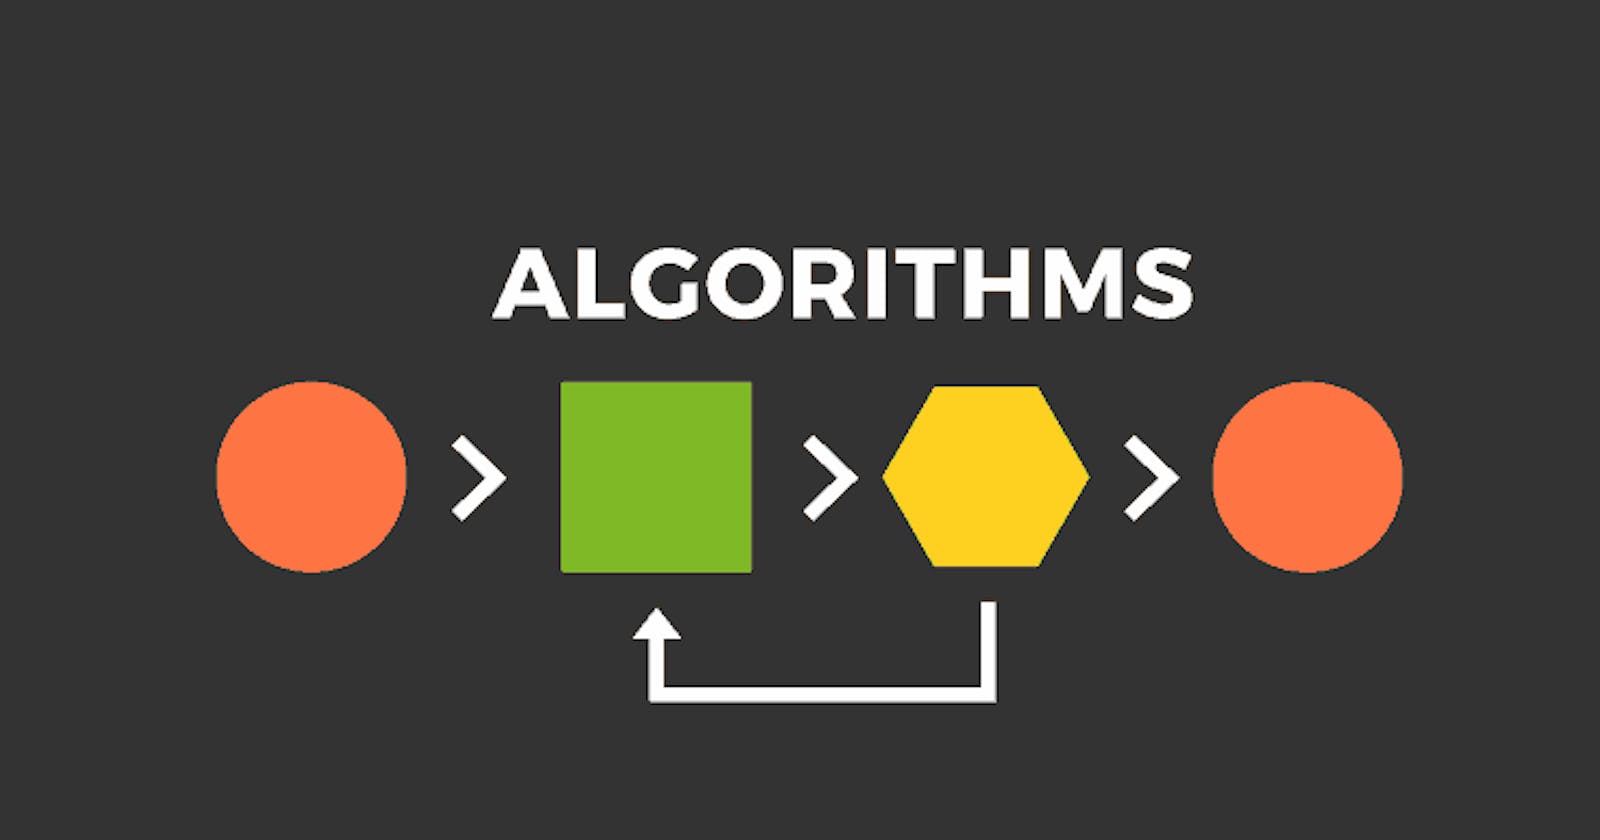 Algorithms - What are they and Why should I care about them?